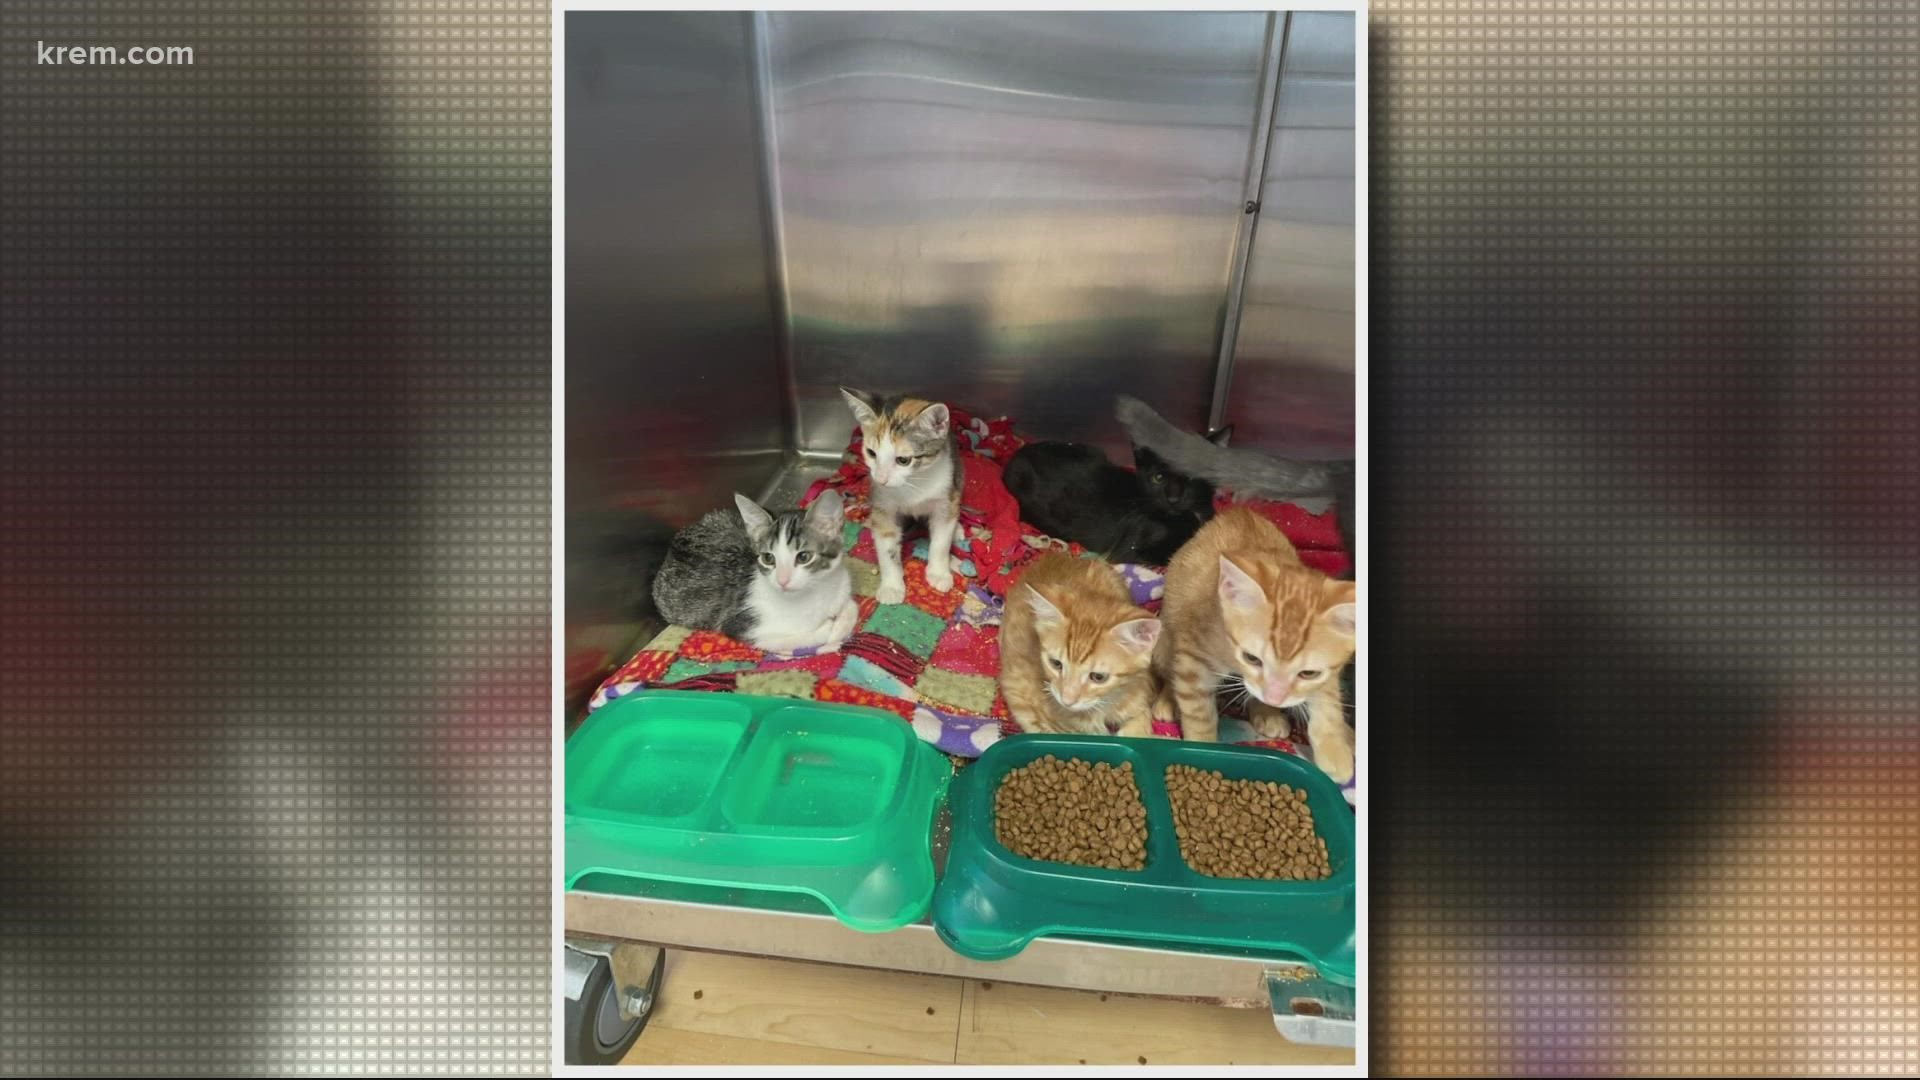 All of the kittens are available for adoption at Spokanimal.